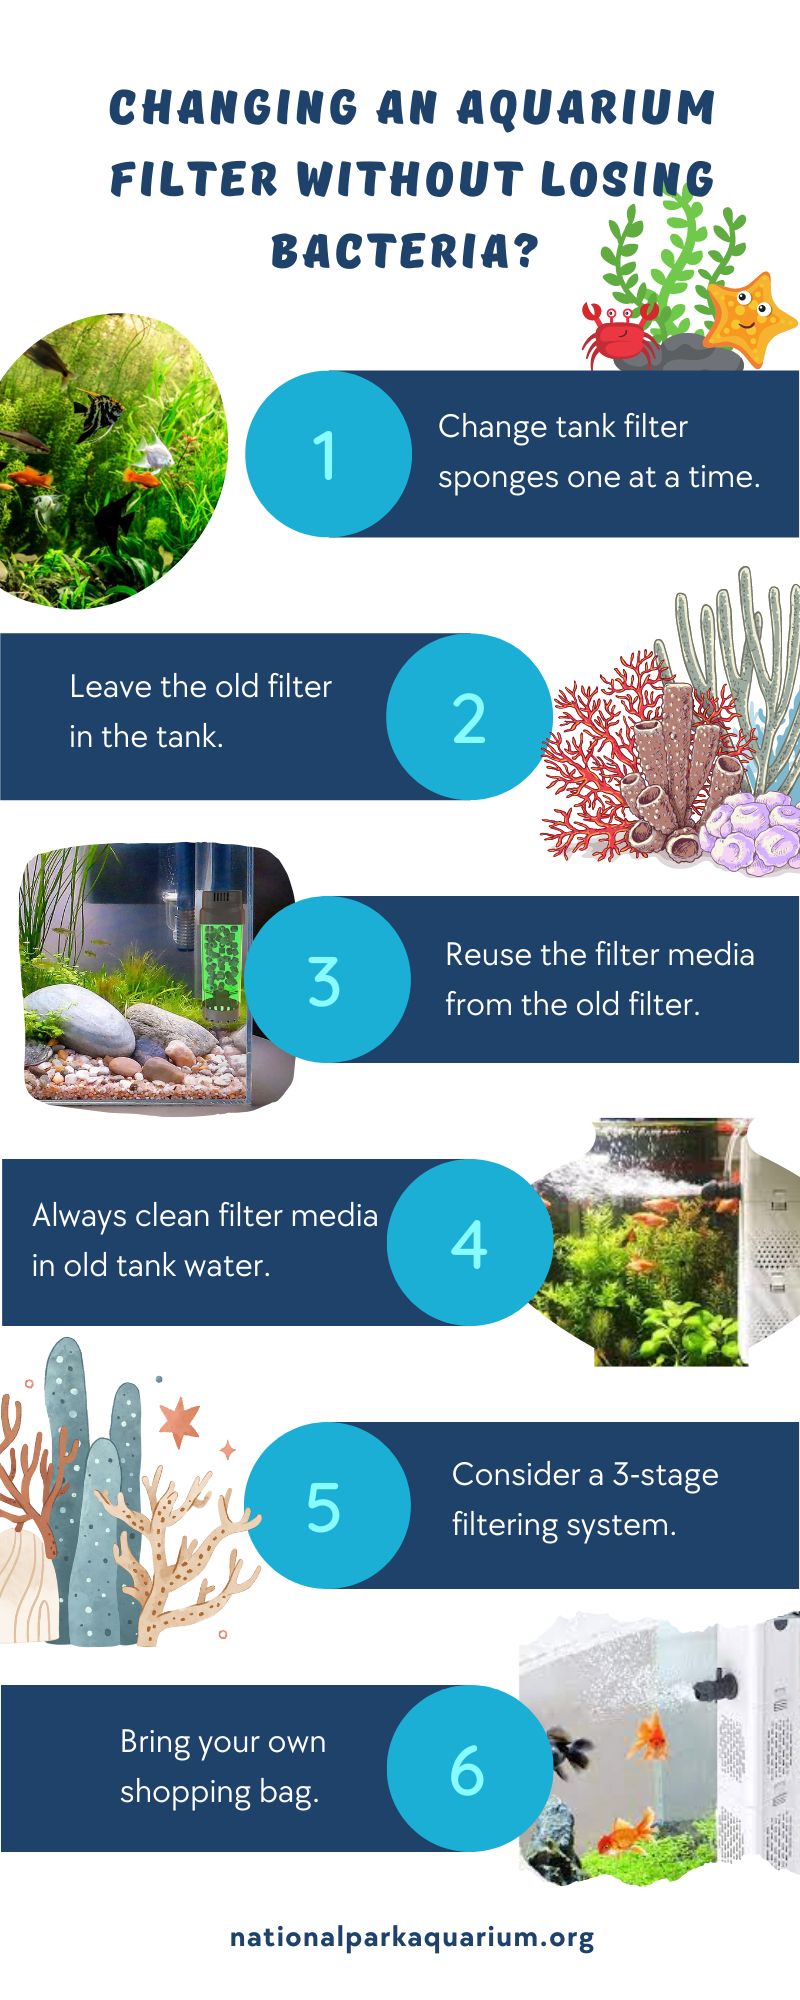 How To Change An Aquarium Filter Without Losing Bacteria